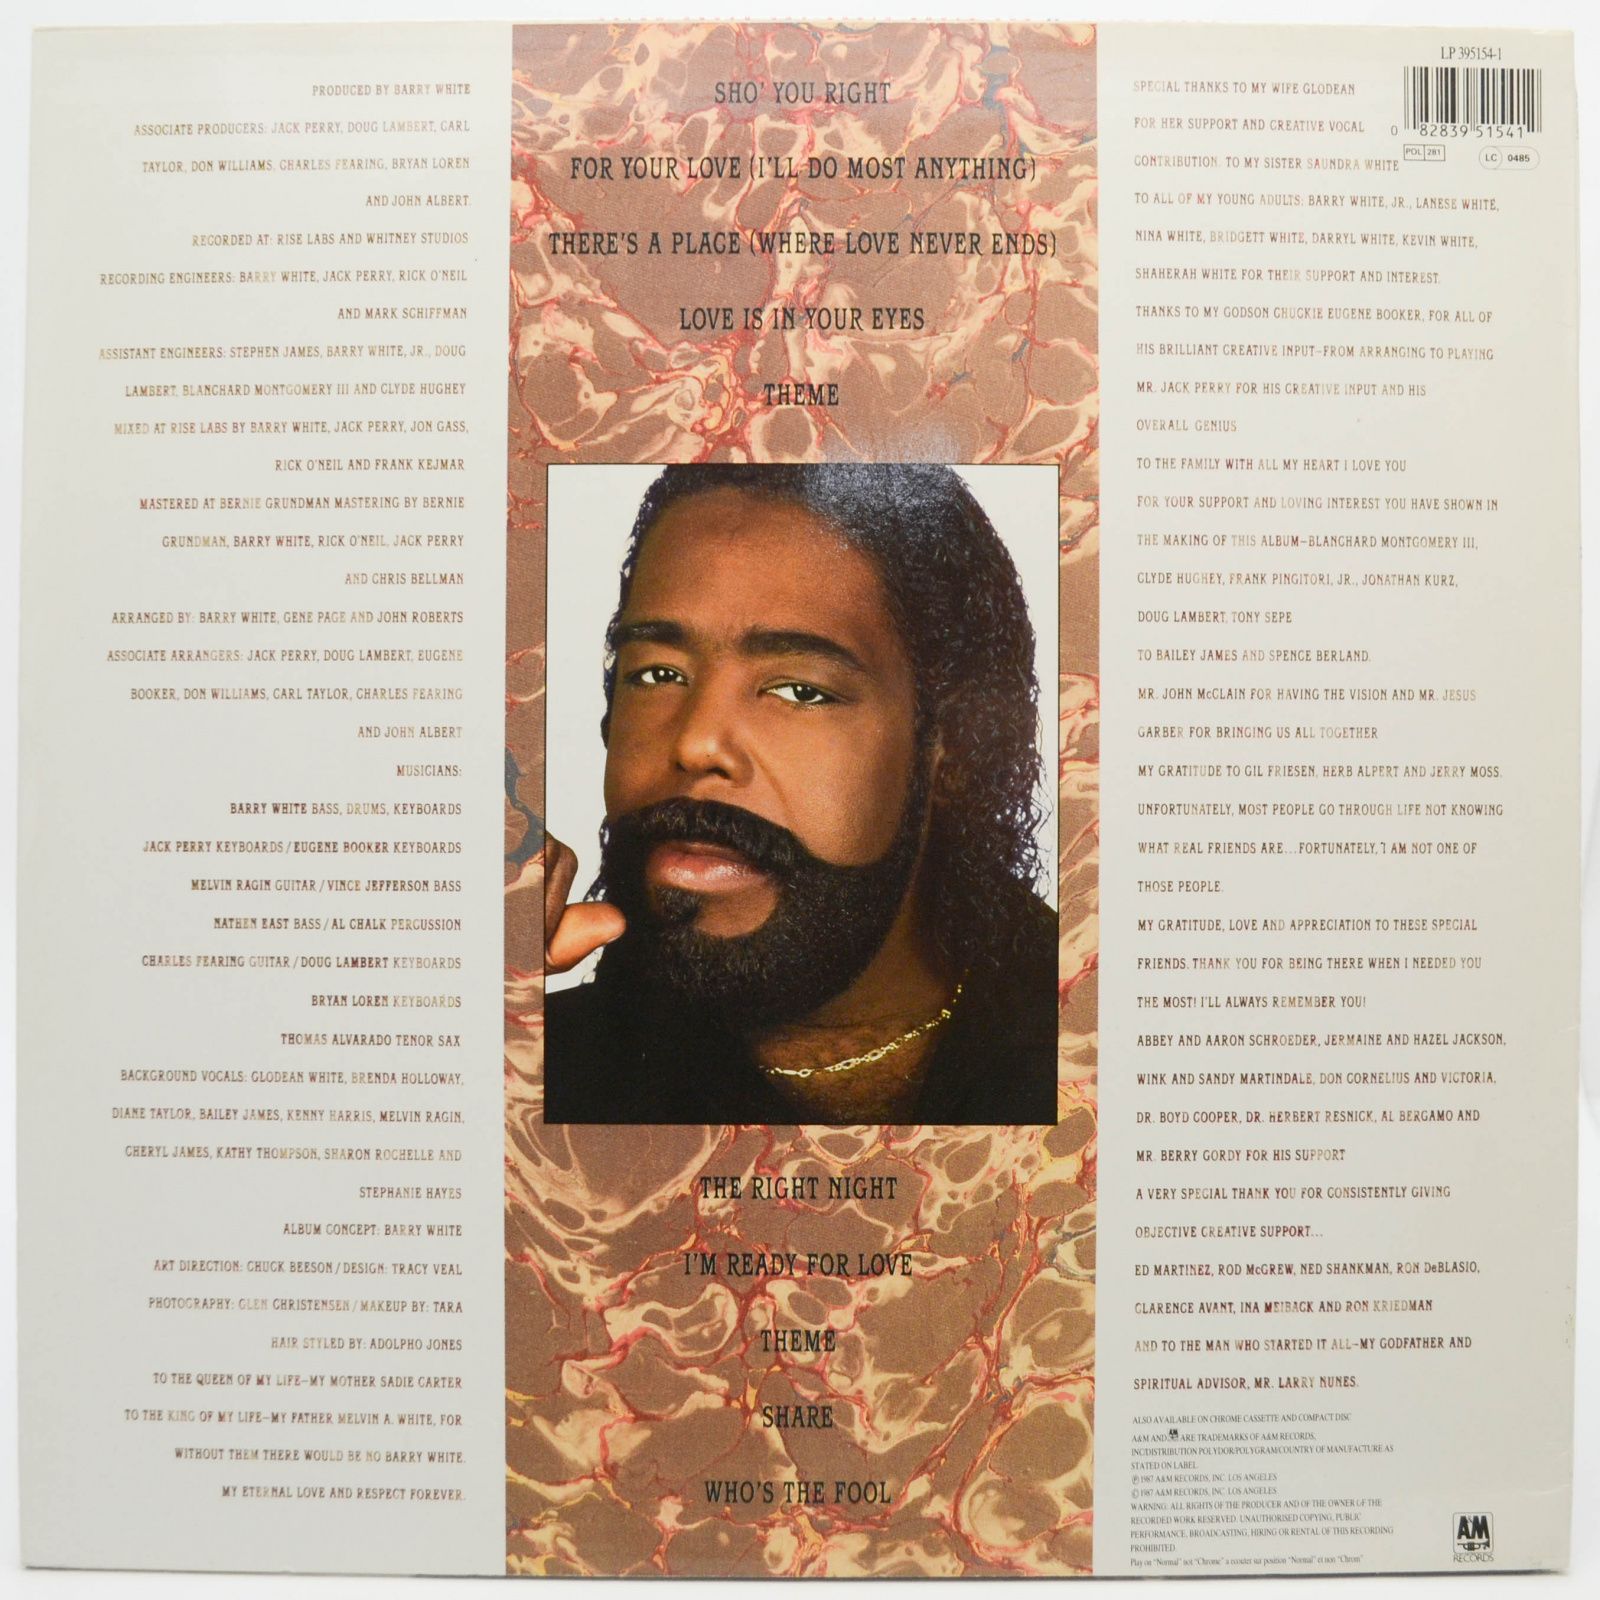 Barry White — The Right Night & Barry White, 1987